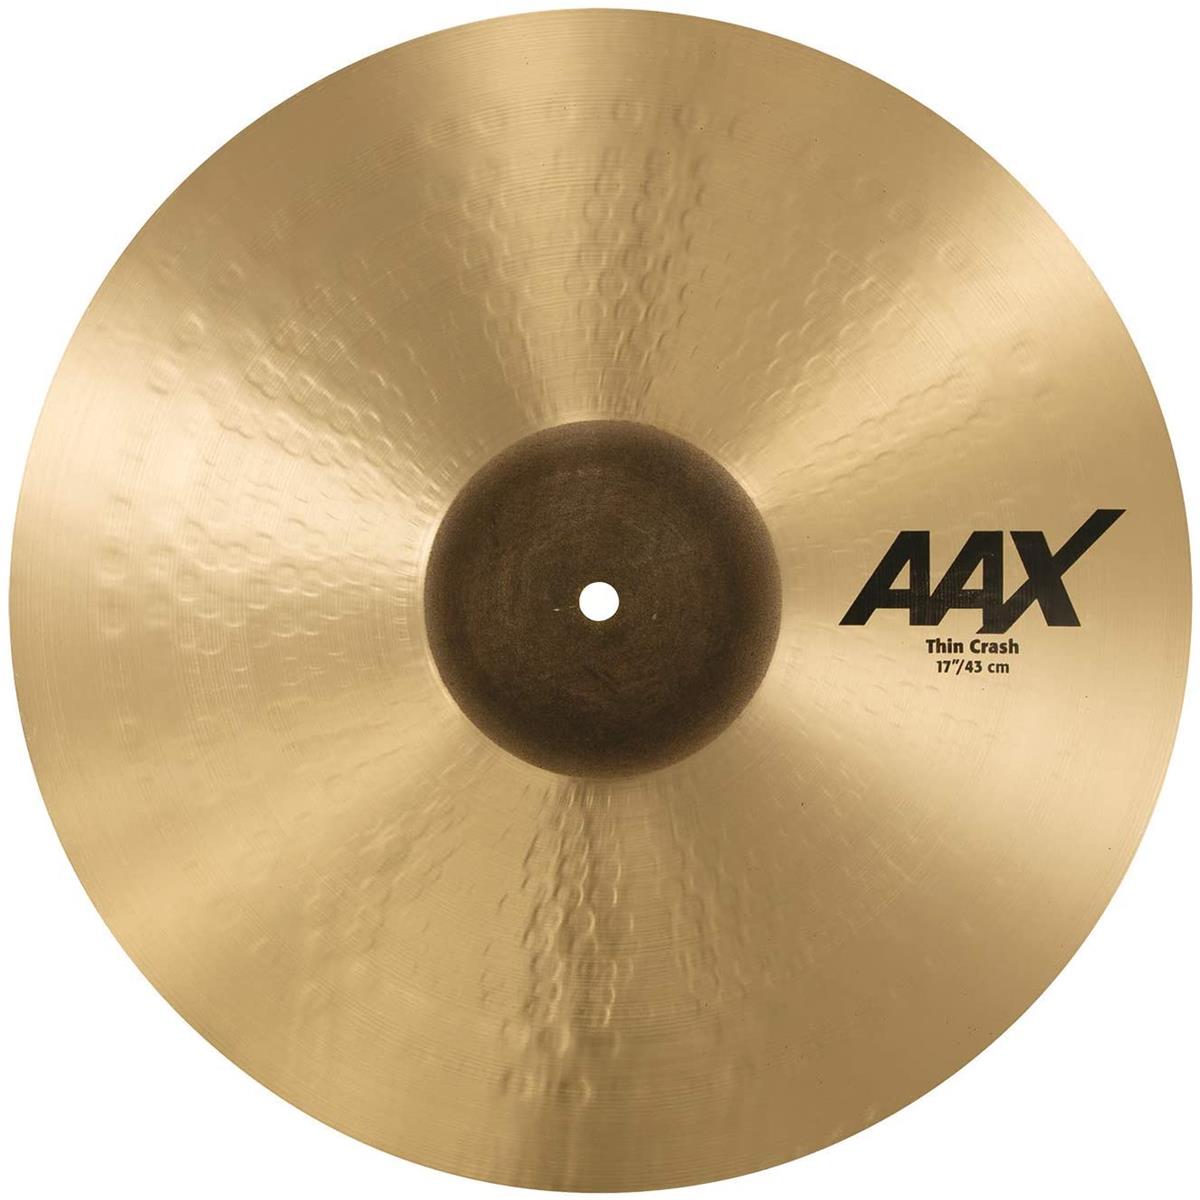 Sabian 17" AAX Thin Crash Cymbal, Natural Finish The 17" AAX Thin Crash from SABIAN introduces a whole new palette of sound to the AAX line. A small raw bell delivers faster response. A whole new style of AAX hammering - much more visible on the surface of the cymbal due to the larger, rounder peen - makes for a thinner, more complex and slightly darker crash. At the same time, more highs are introduced into the sound, resulting in a wider band of frequency.For drummers, that means brighter highs and more complex lows. SABIAN has always pushed the boundaries of innovation, using the latest manufacturing technology to answer new trends in music and sound. AAX Thin Crashes are no exception, answering the call for thinner, faster, more complex crashes.